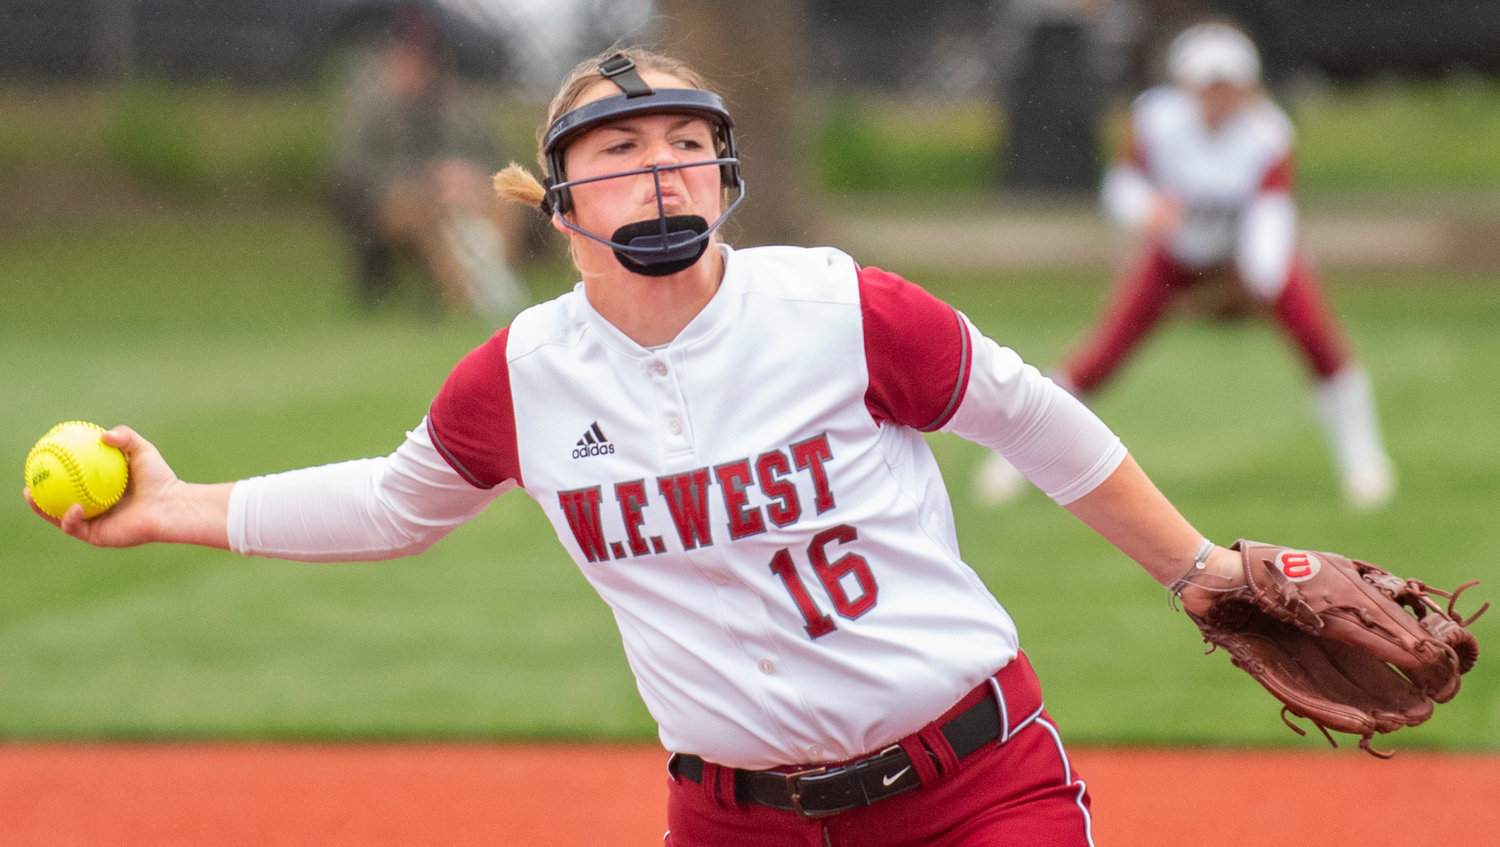 W.F. West ace Kamy Dacus winds up to deliver a pitch to Rochester on Thursday.